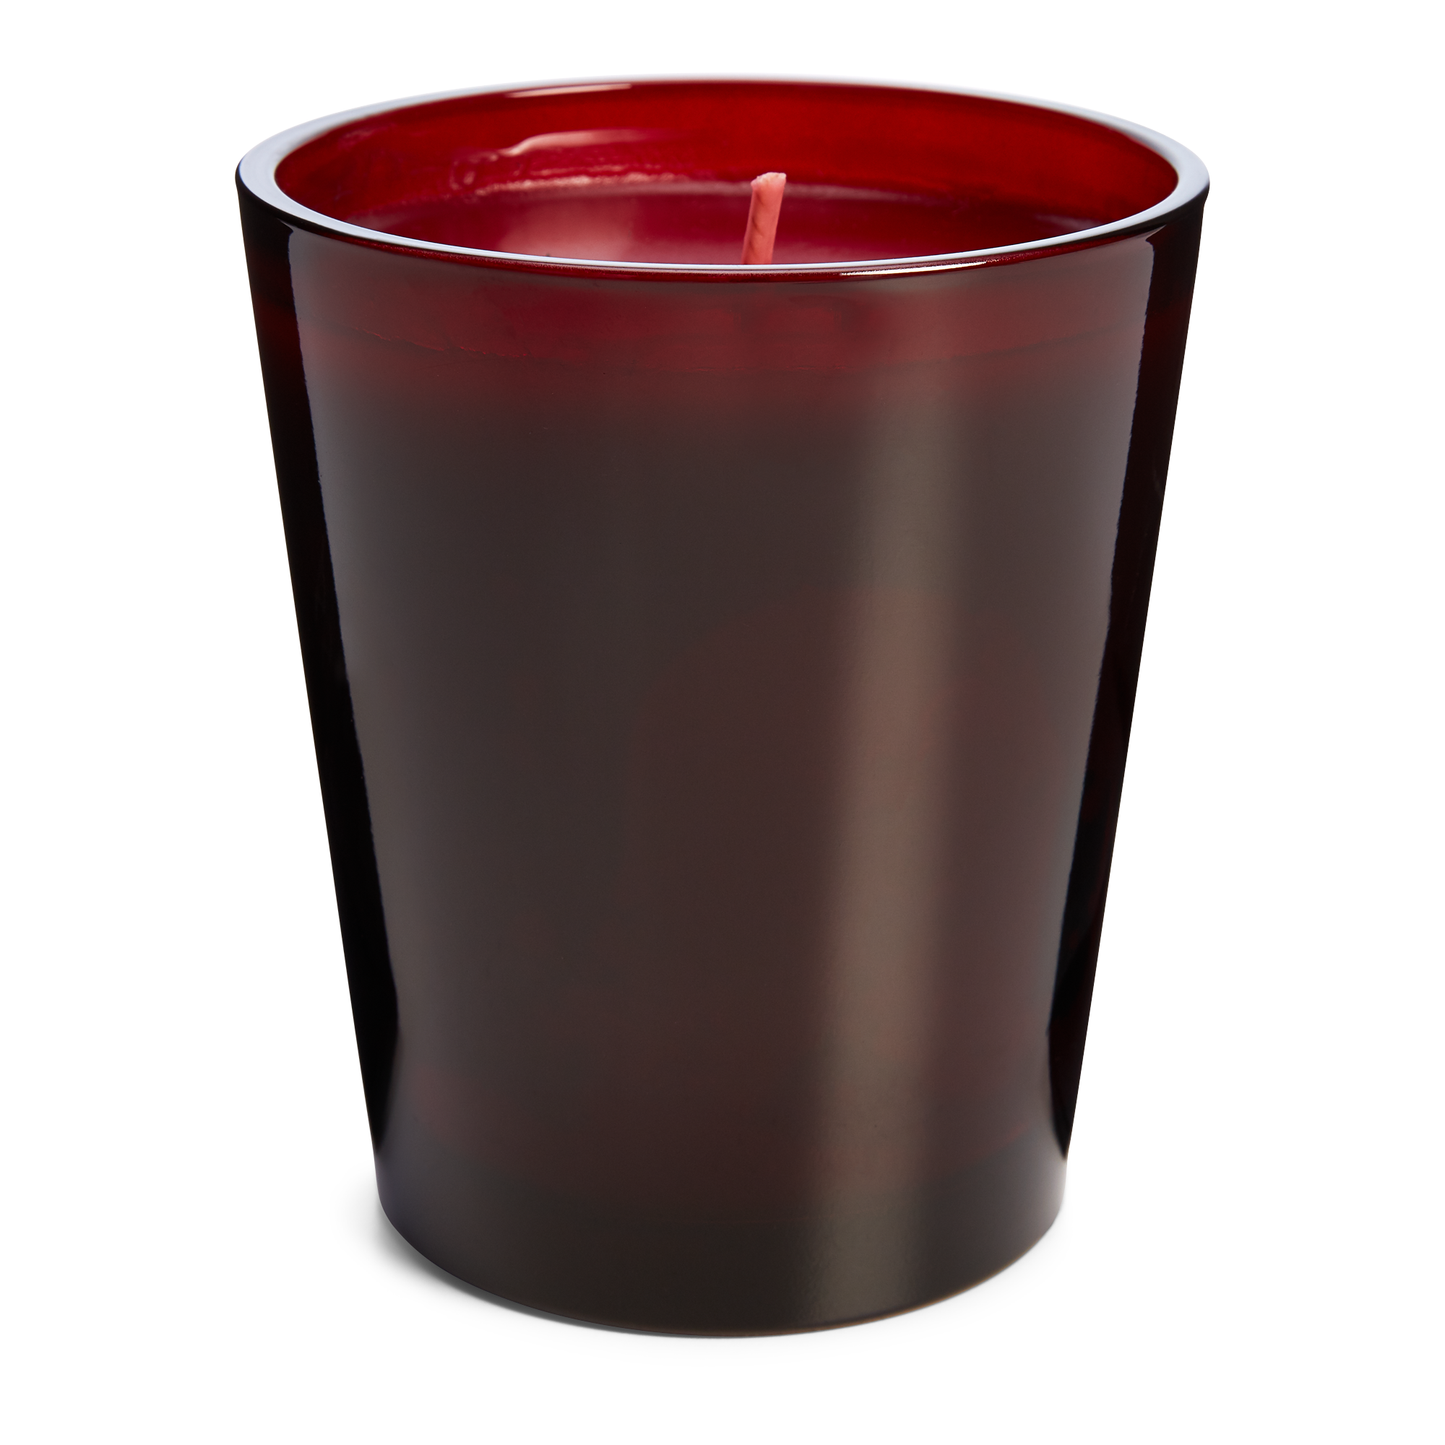 Holiday scented candle